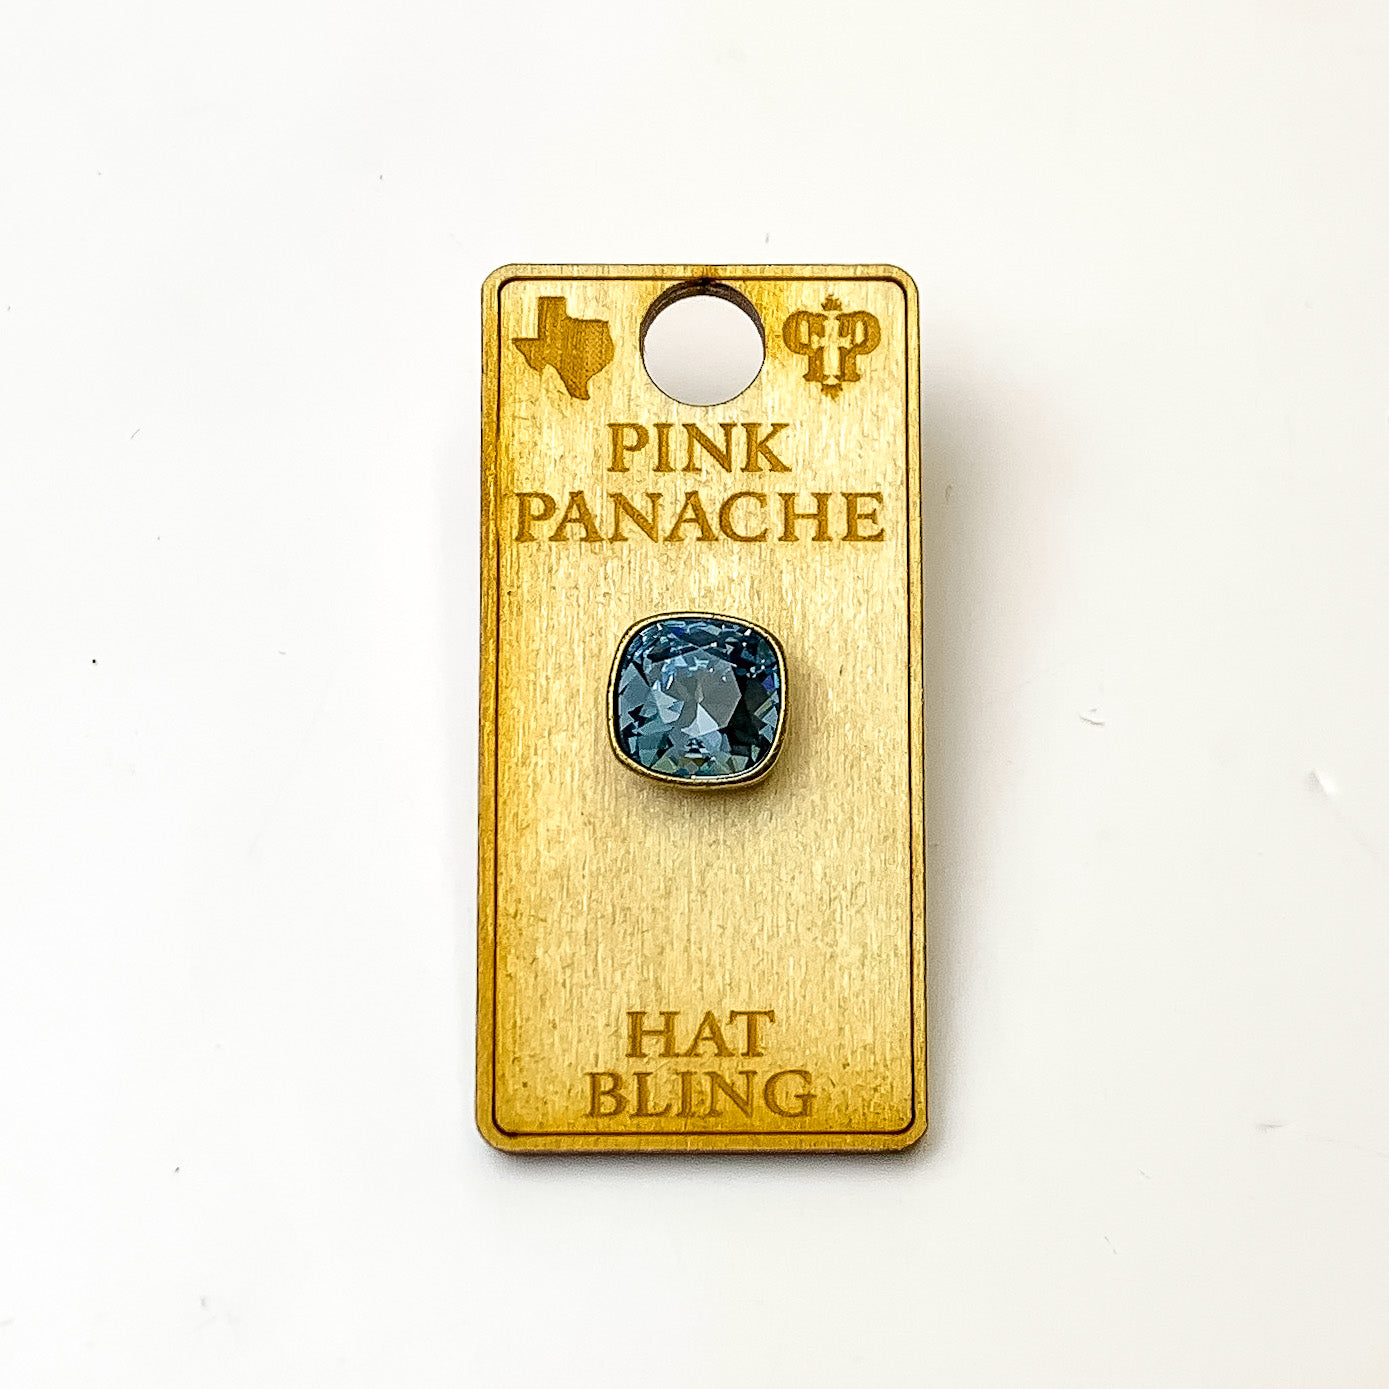 Bronze, square hat pin with a denim blue cushion cut crystal. This hat pin is pictured on a wooden Pink Panache holder on a white background.